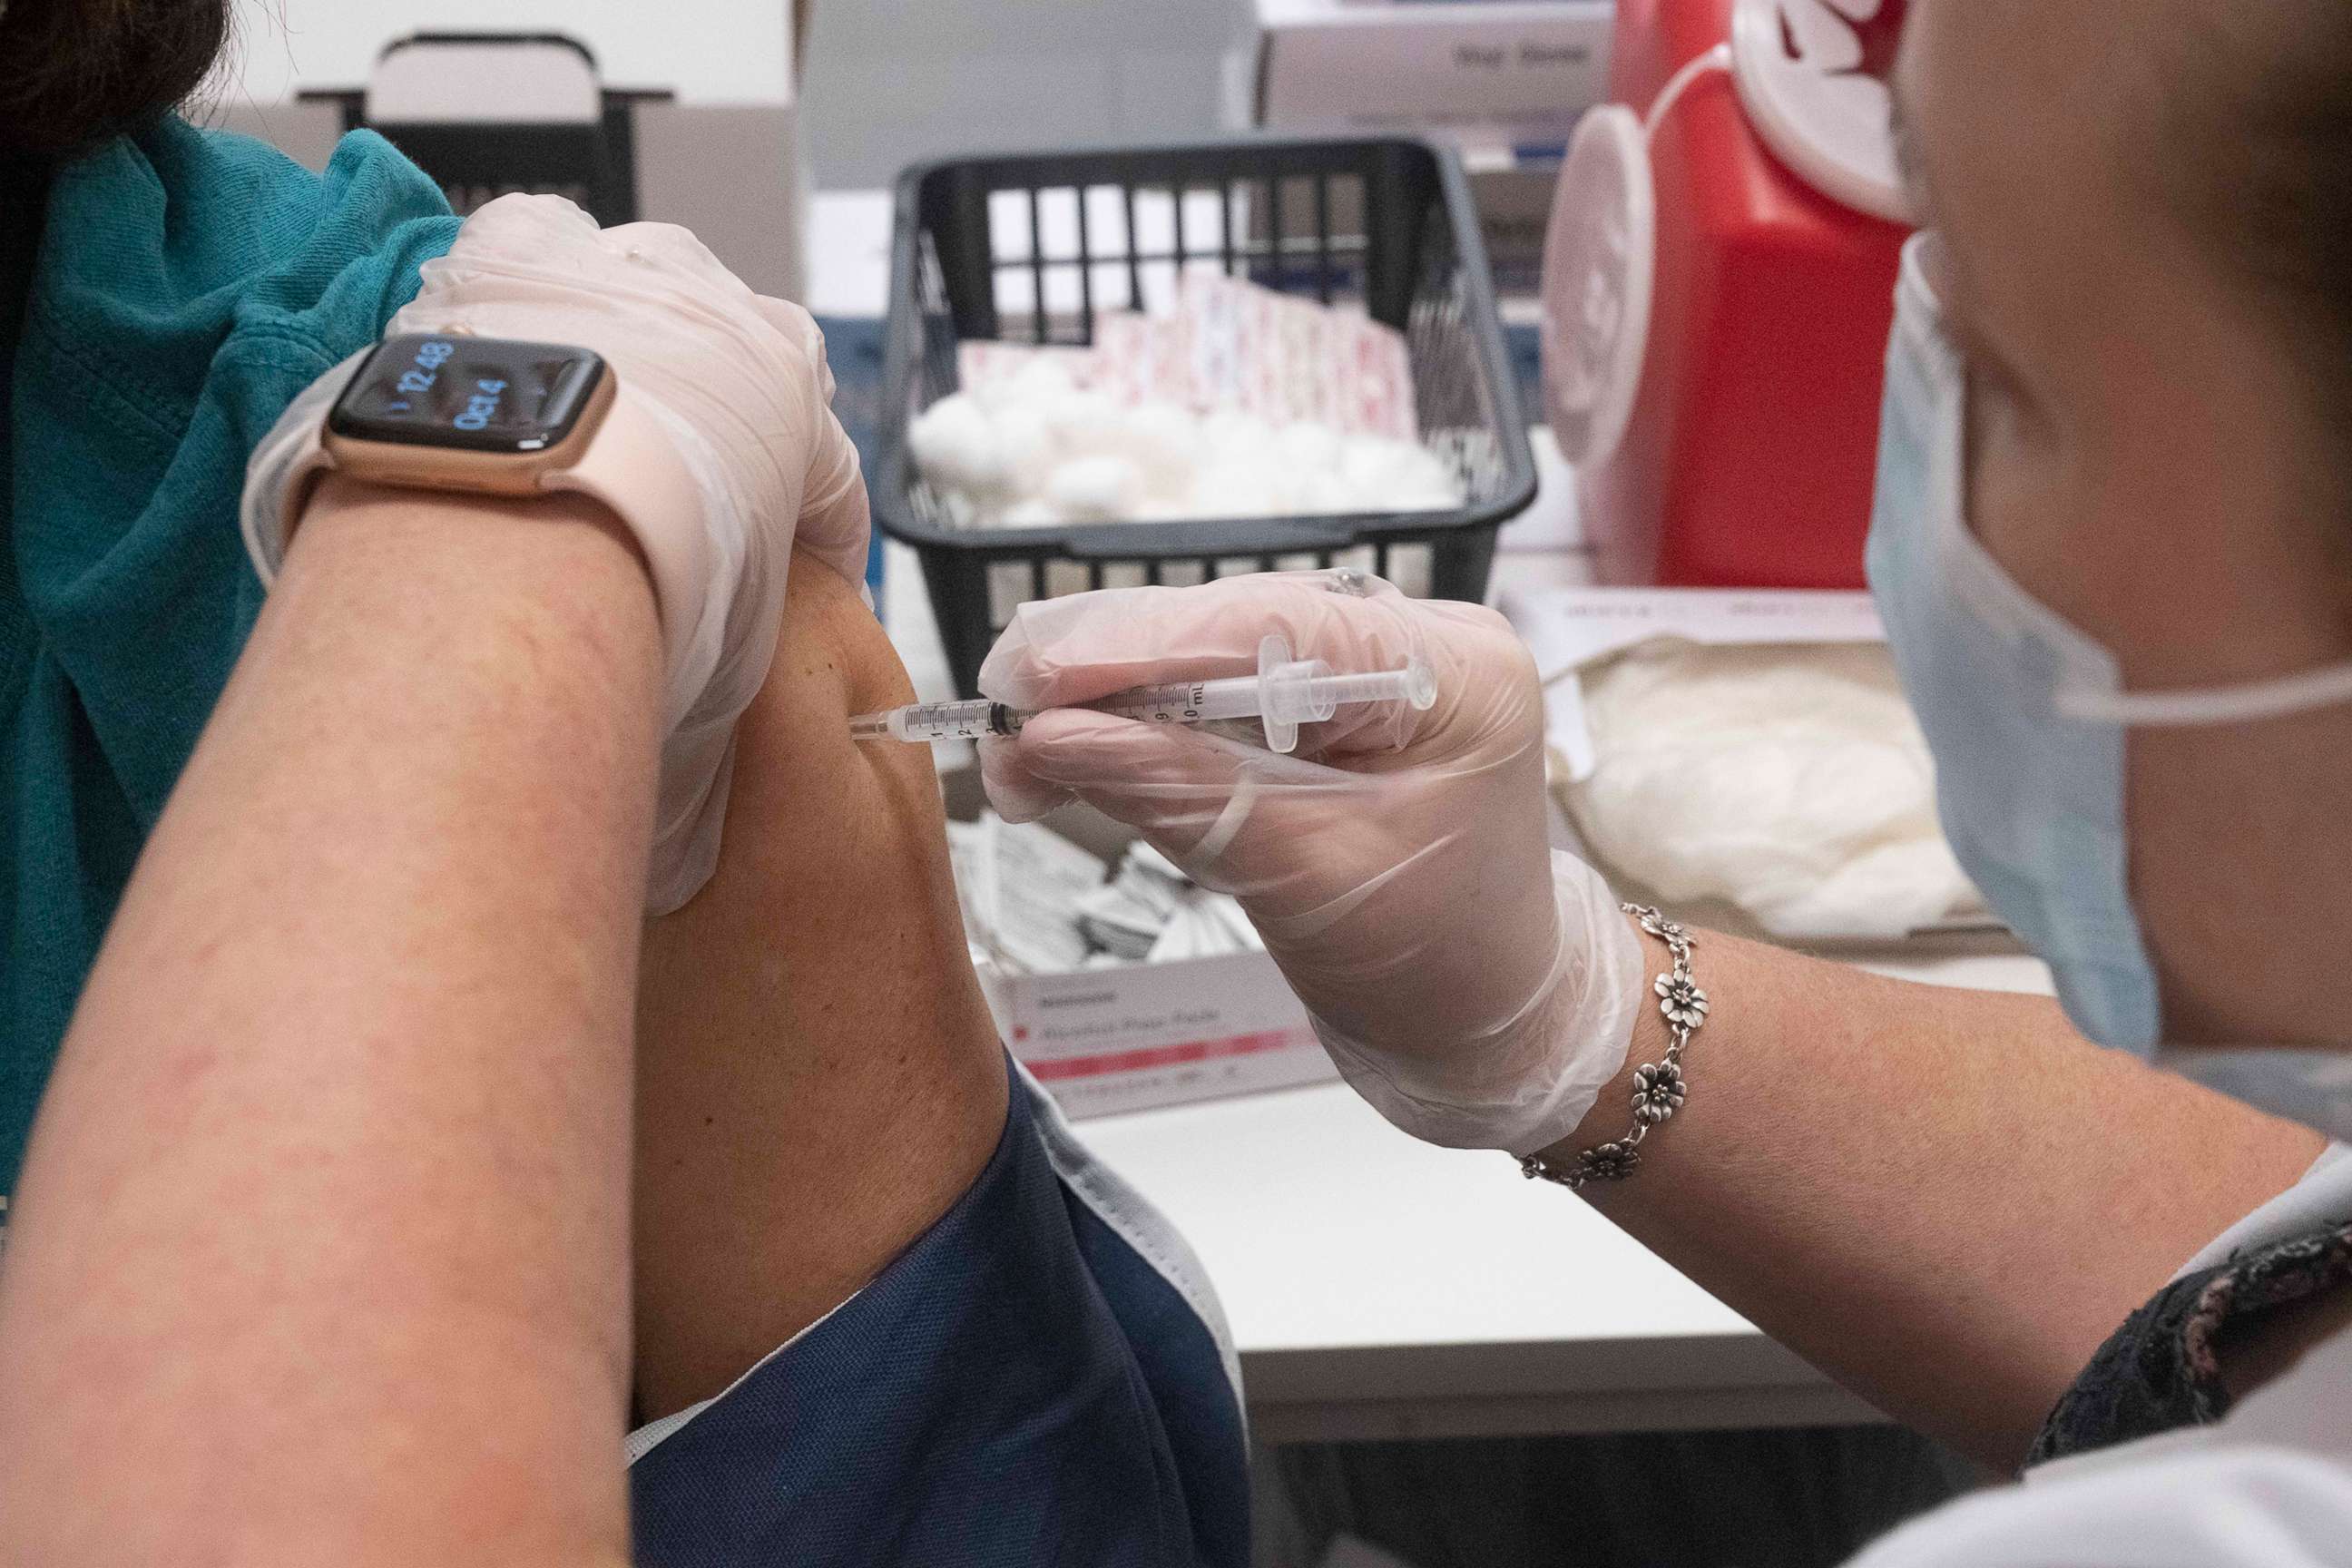 PHOTO: The booster shot for the Pfizer vaccine against COVID-19 is administered to a Texas resident over 65 at a pharmacy clinic in Austin, Texas, Oct. 4, 2021.